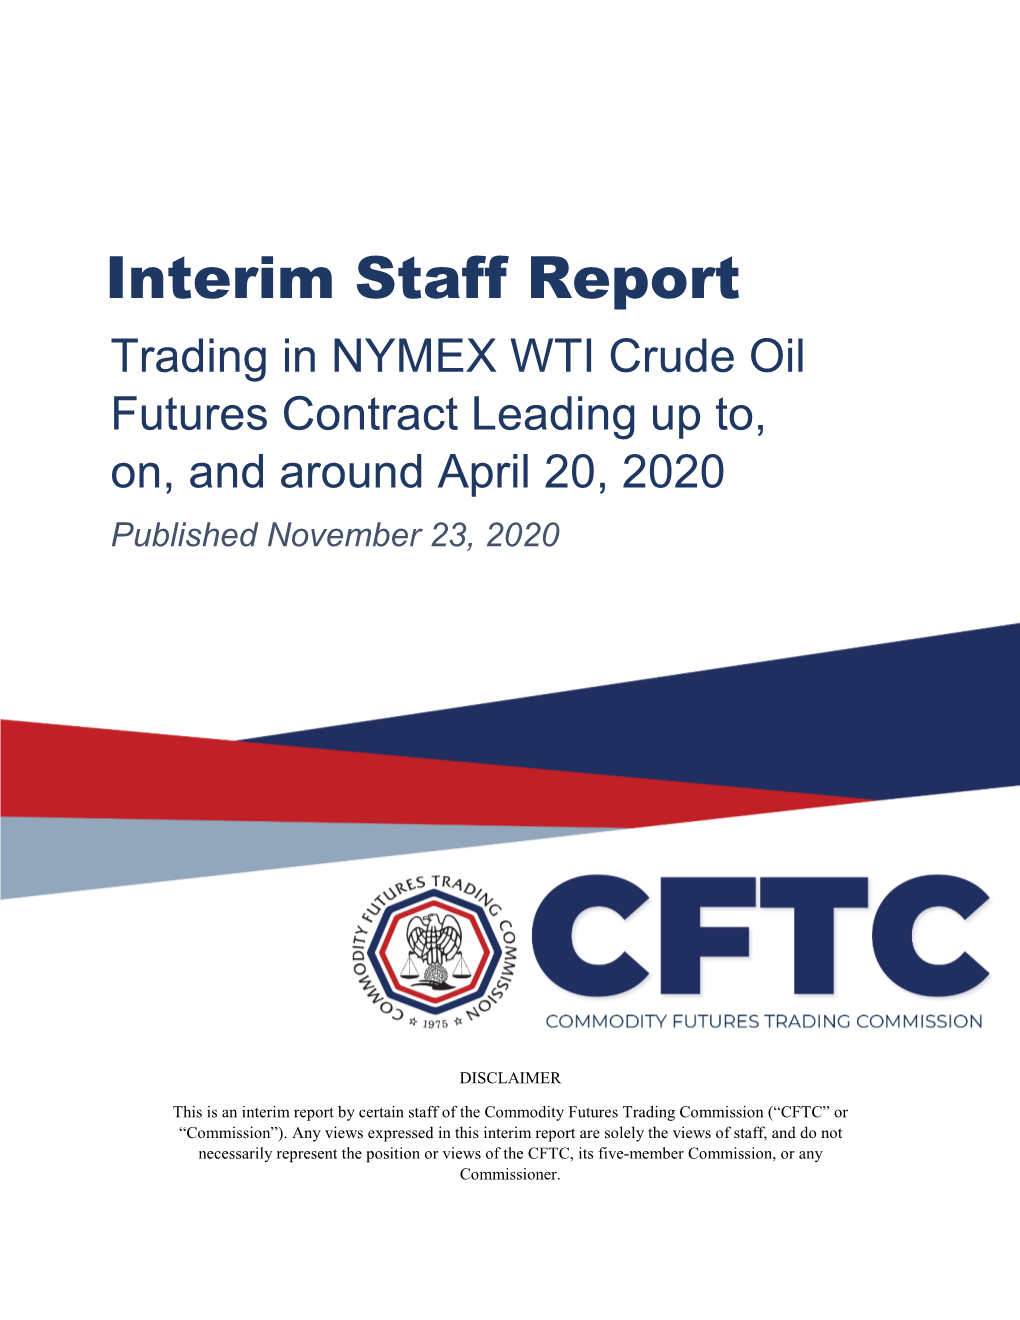 Interim Staff Report on Trading in NYMEX WTI Crude Oil Futures Contract Leading up To, On, and Around April 20, 2020